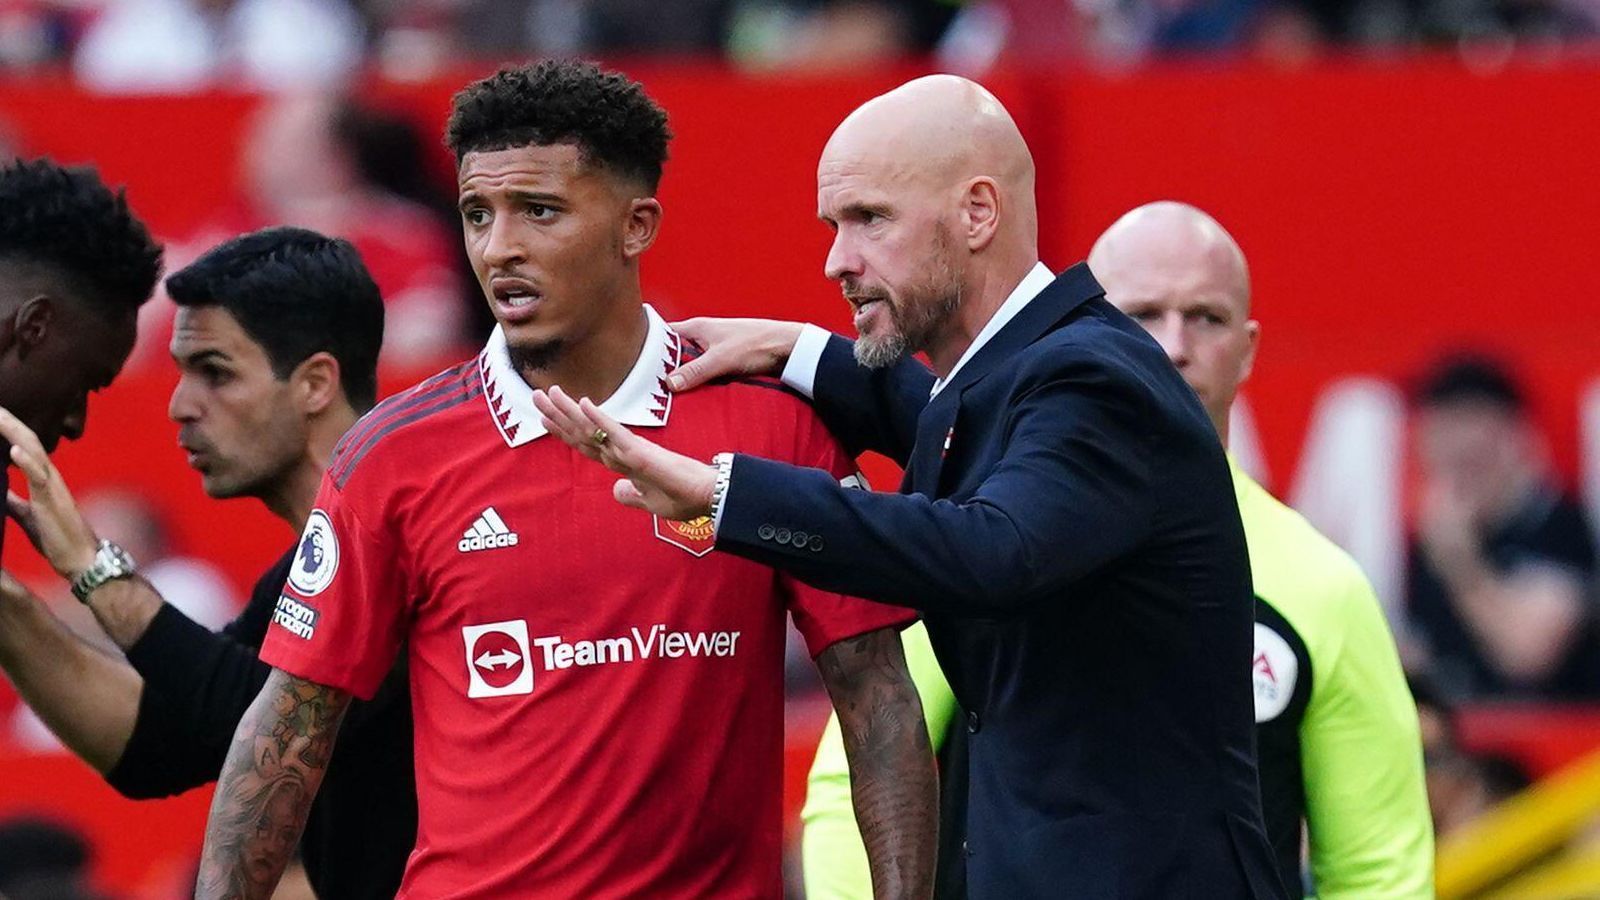 Jadon Sancho has not hit the heights expected of him at Manchester United so far (photo cred: Football365)